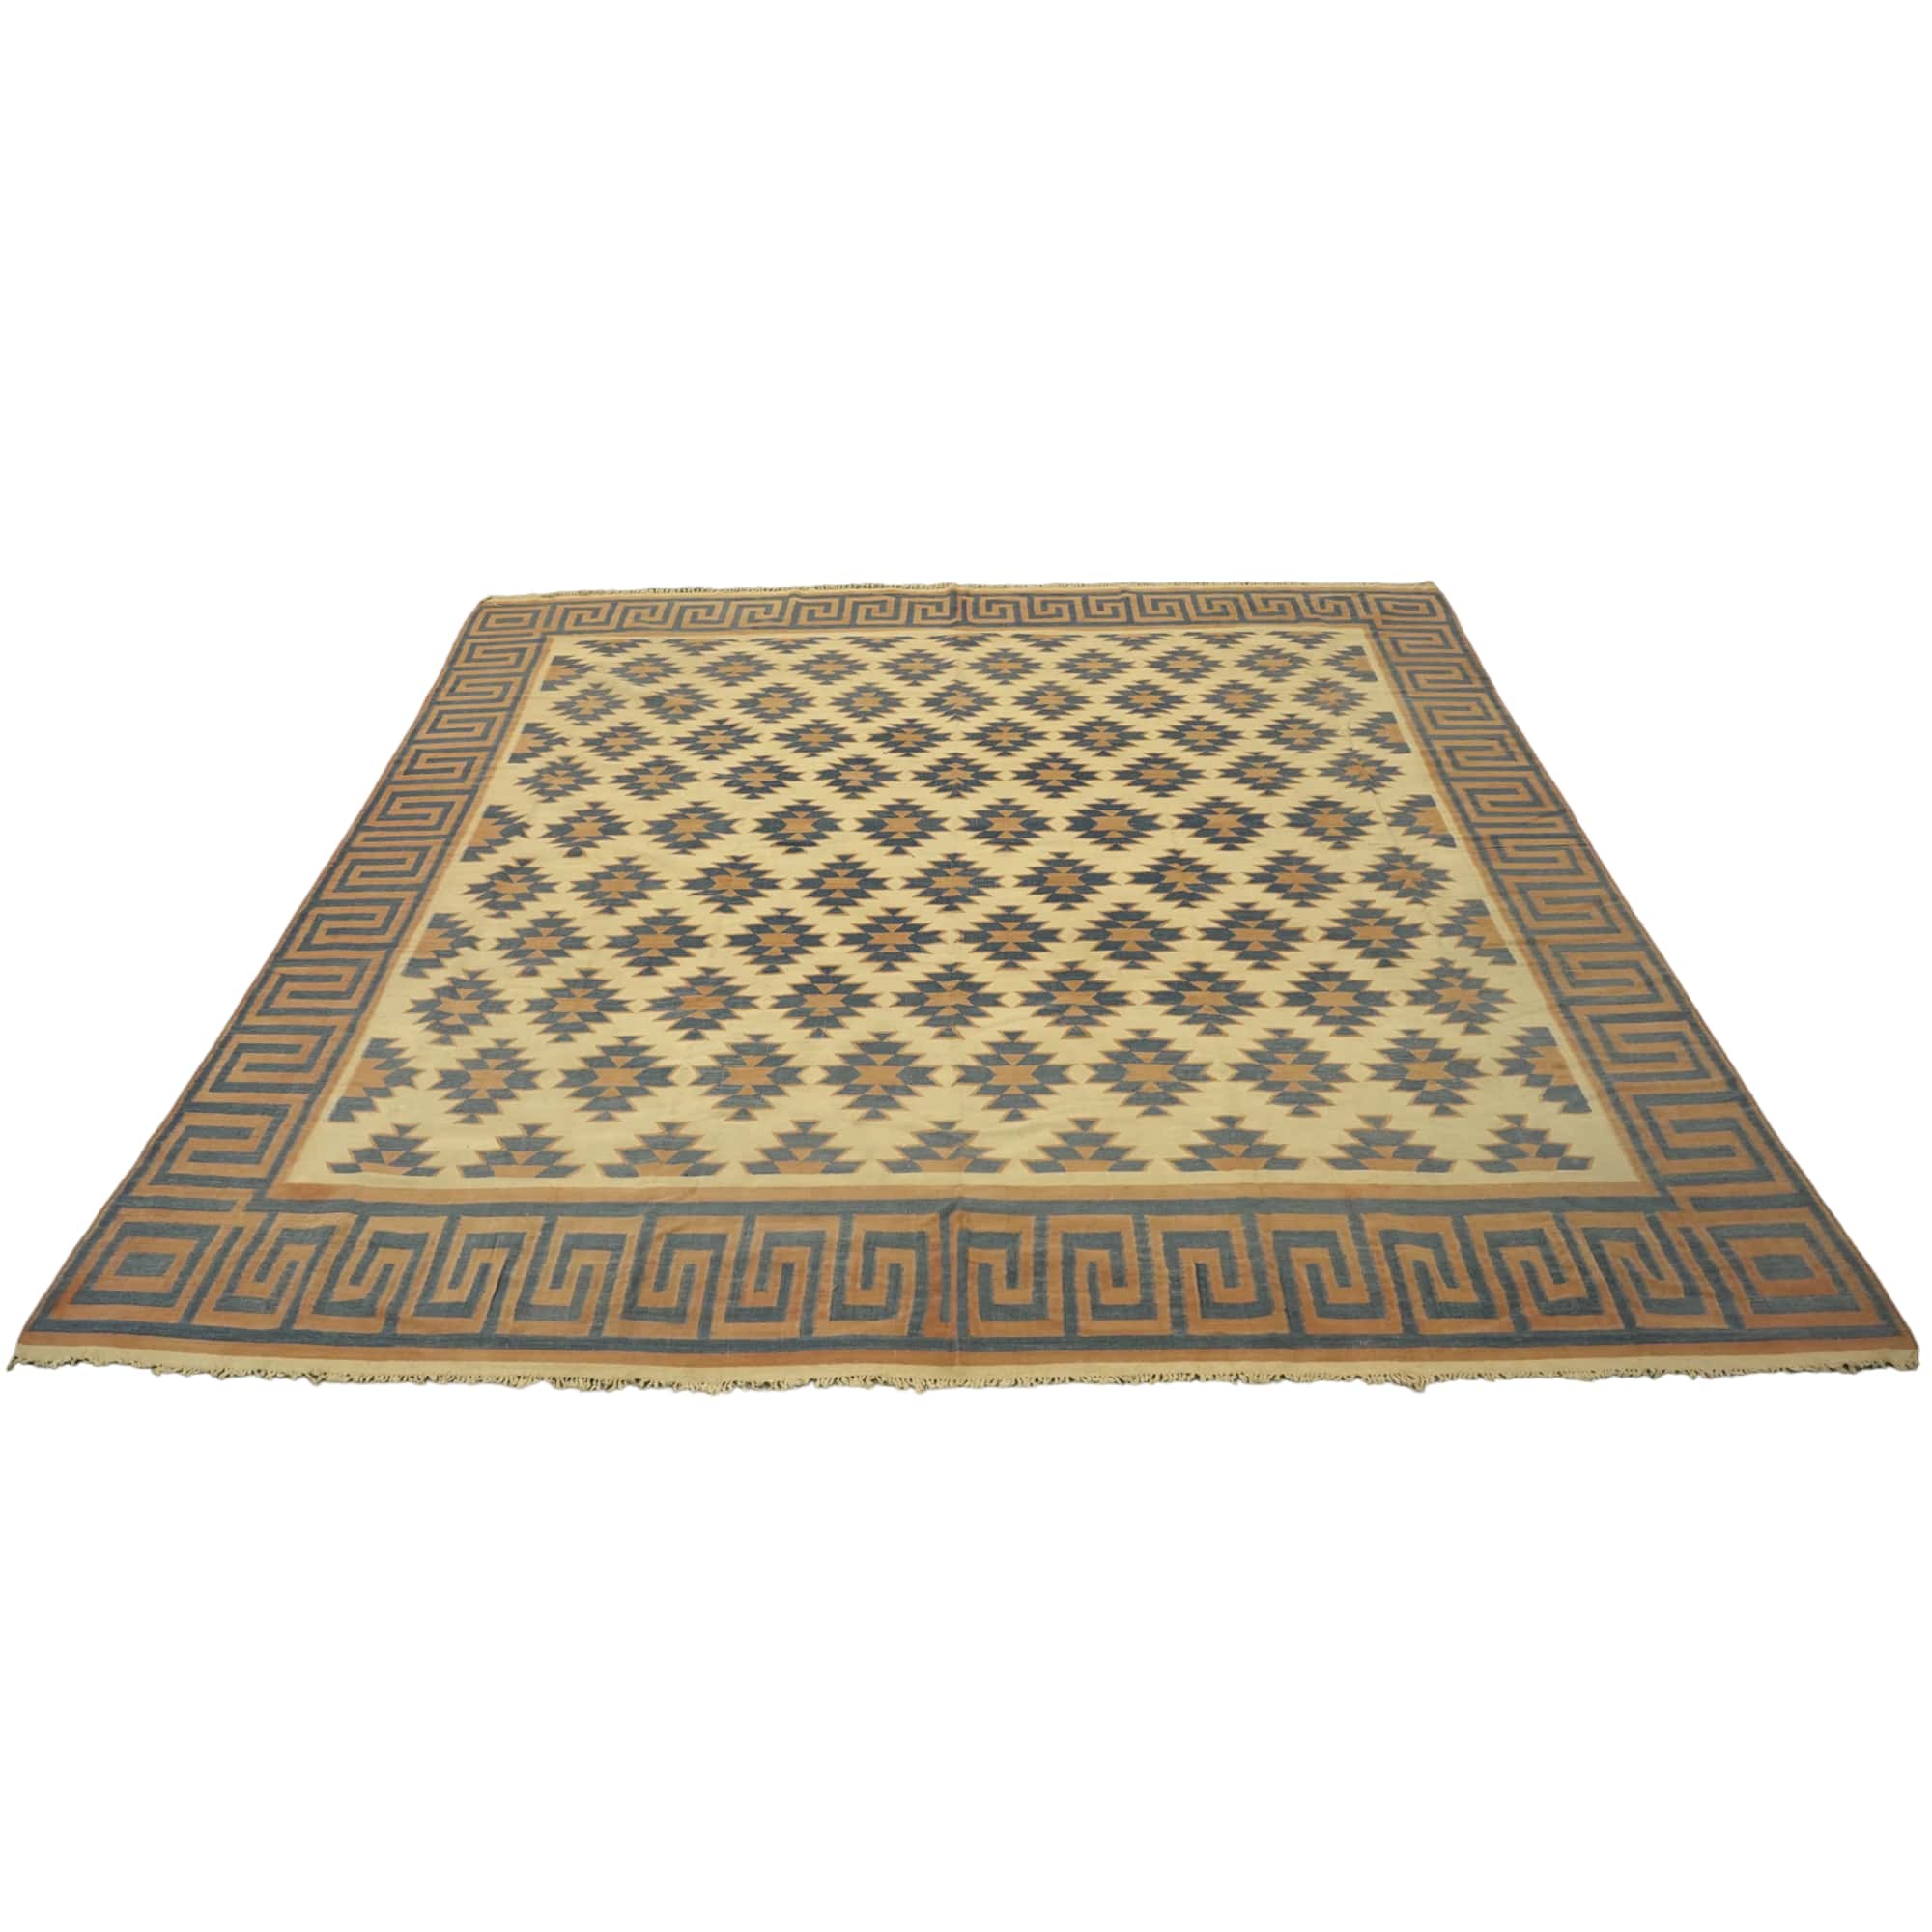 Vintage Dhurrie Geometric Square Rug from Rug & Kilim For Sale